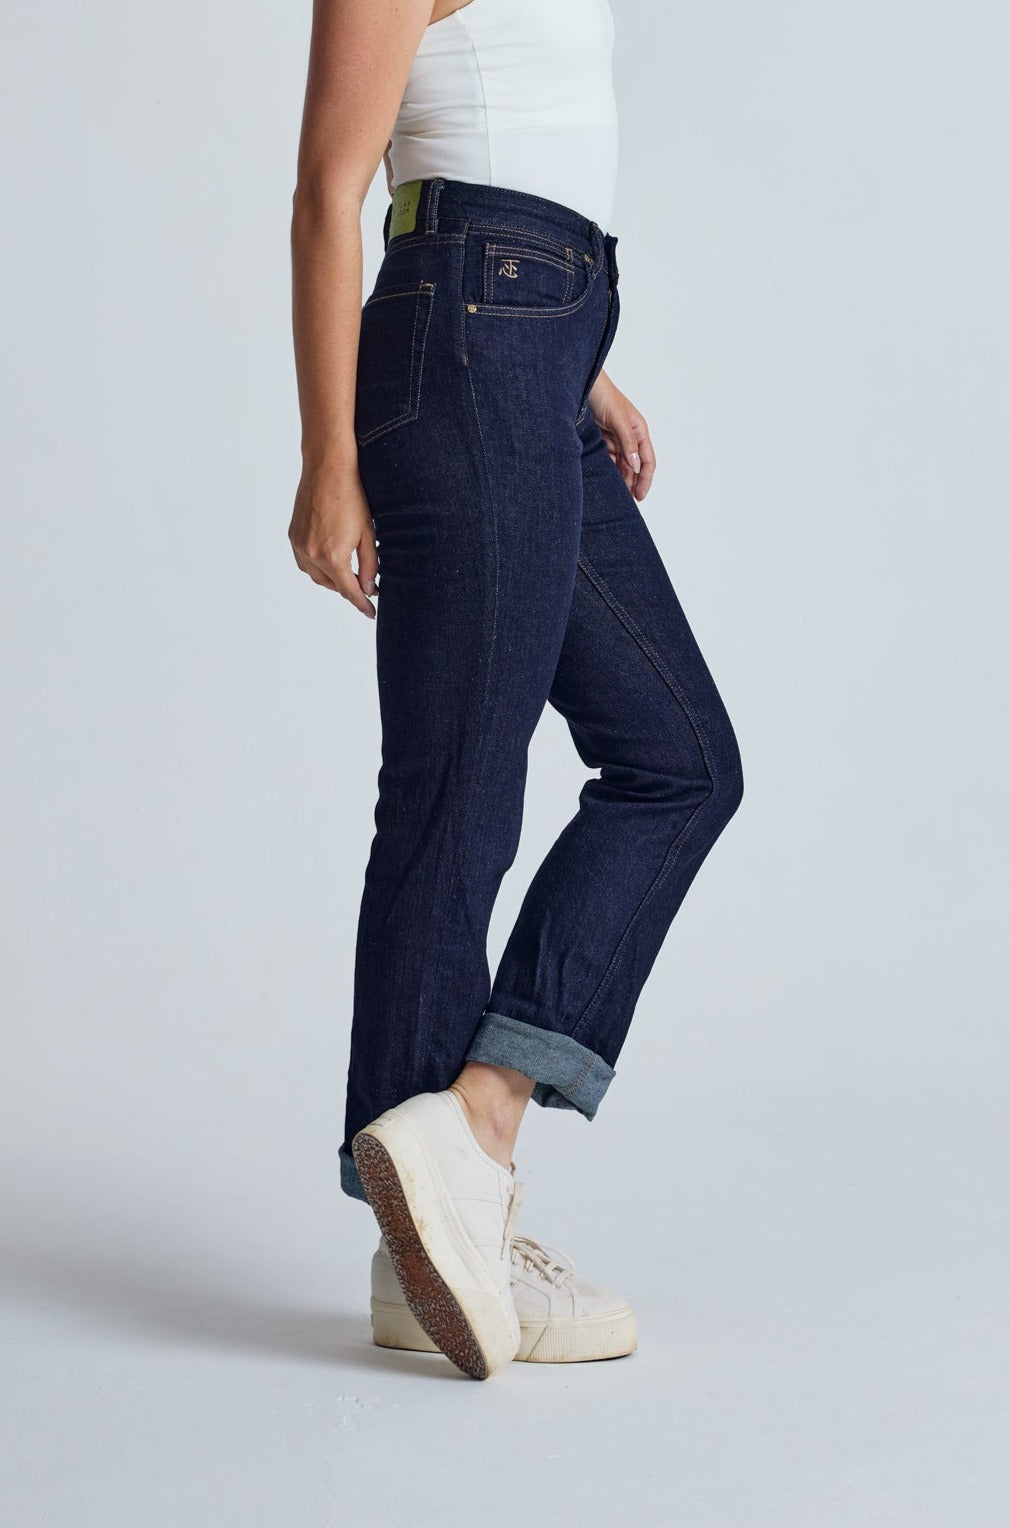 Rinse Indigo Lucille Tapered Jeans - GOTS Certified Organic Cotton And Hemp